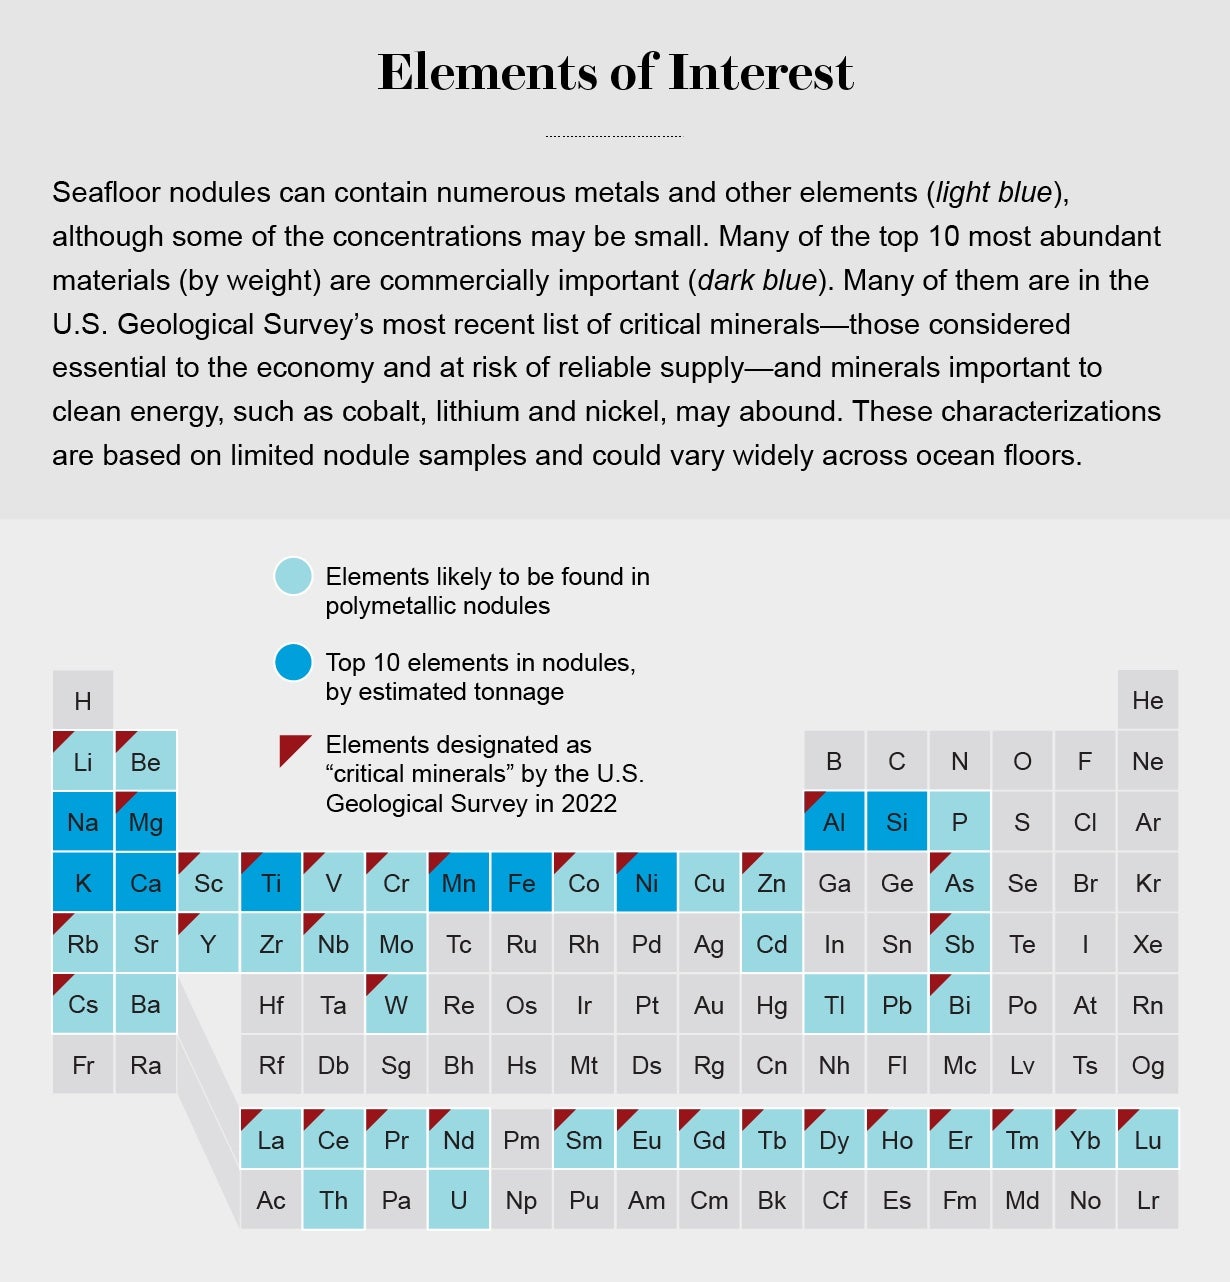 Periodic table highlights elements likely to be found in nodules, top 10 elements in nodules by estimated tonnage, and elements designated as “critical minerals” by the USGS.